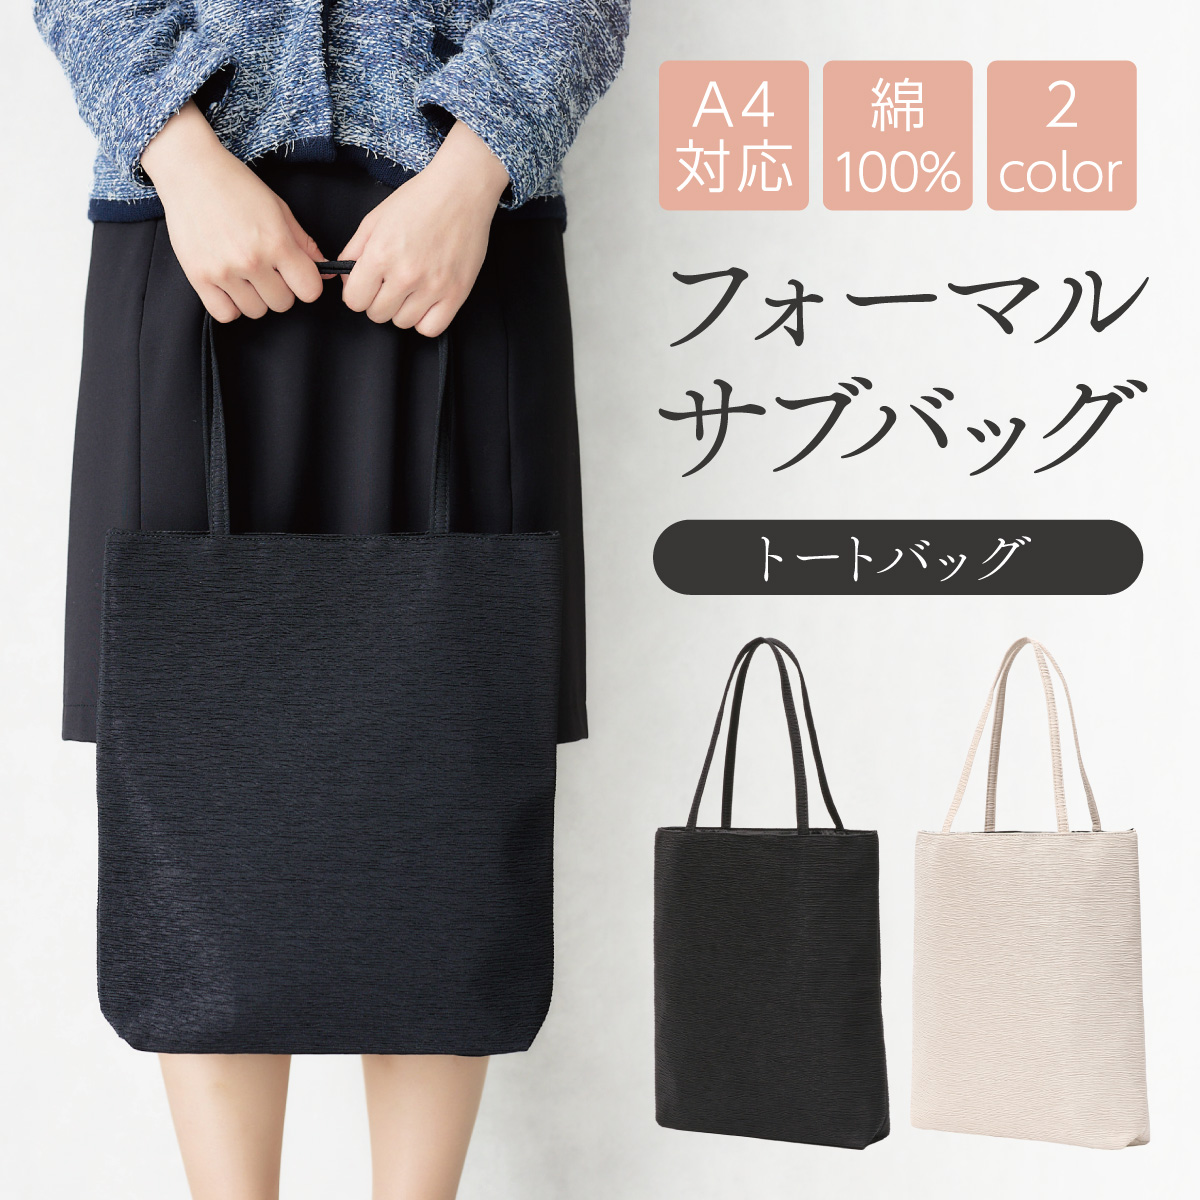  sub bag formal bag tote bag party bag A4 cotton lady's largish high capacity .. both for ceremonial occasions . examination go in . type graduation ceremony go in . type .. type 